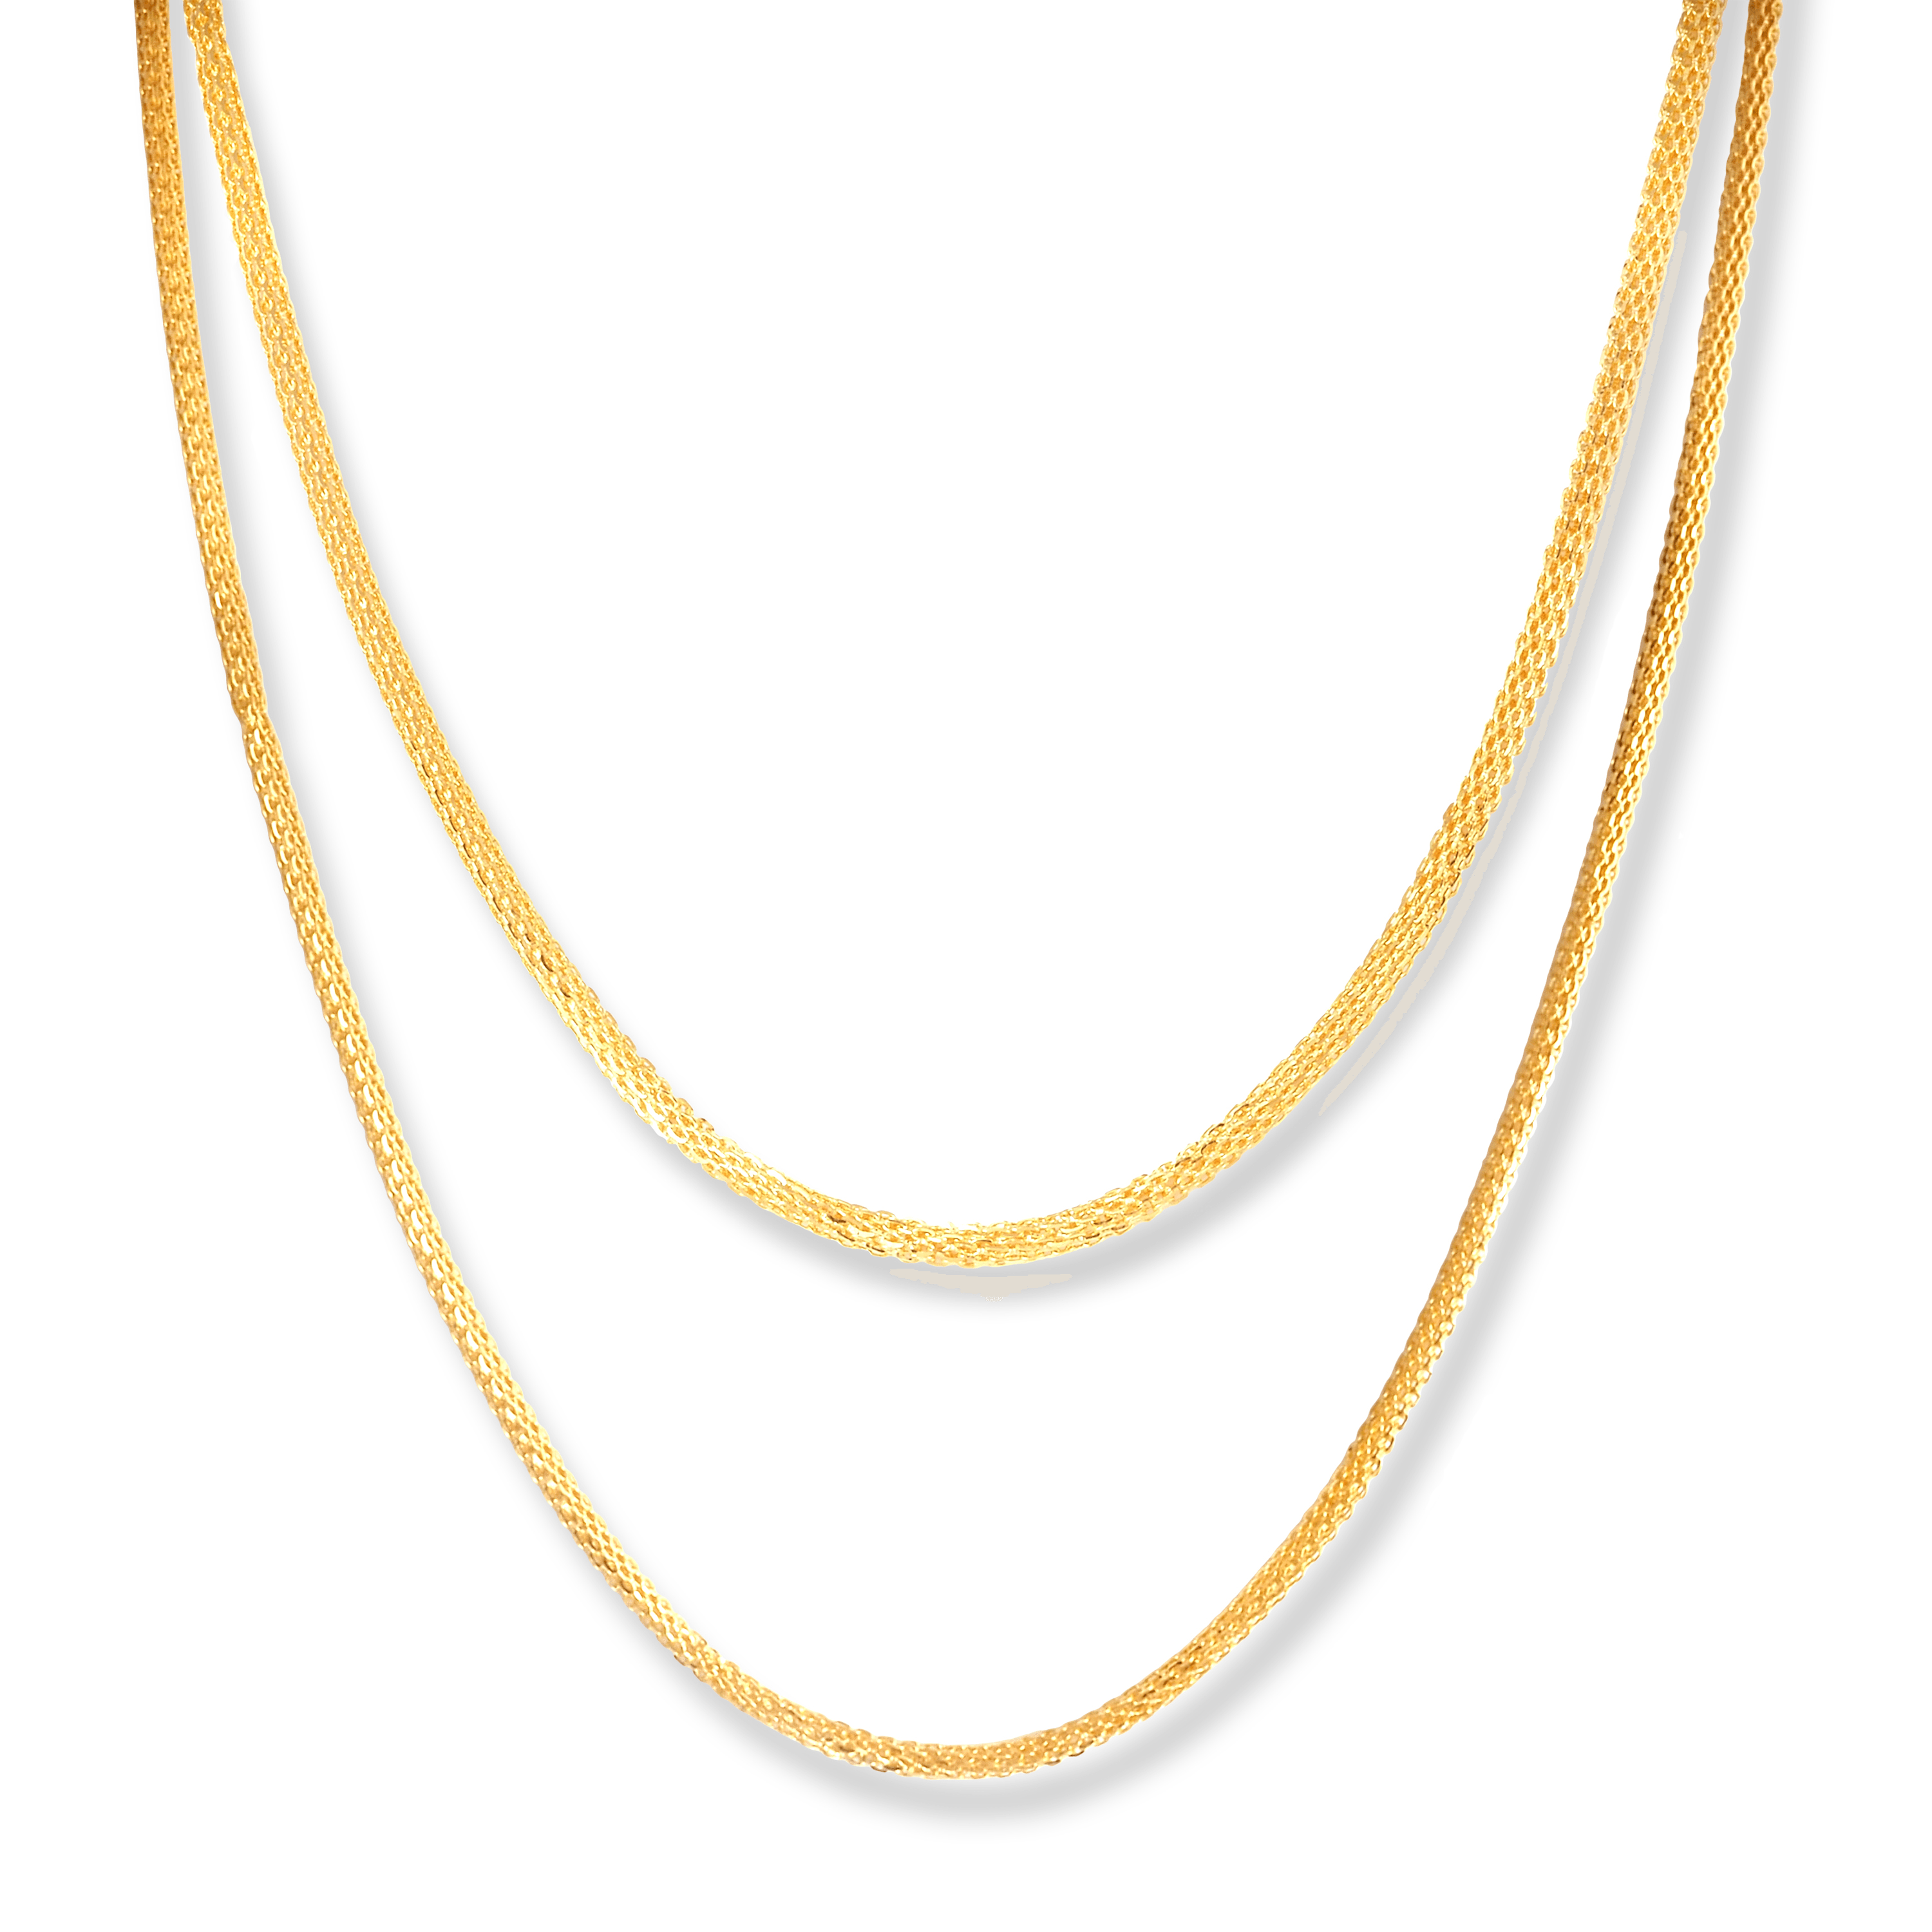 22ct Gold Hollow Milan Chain with Lobster Clasp C-7136 - Minar Jewellers